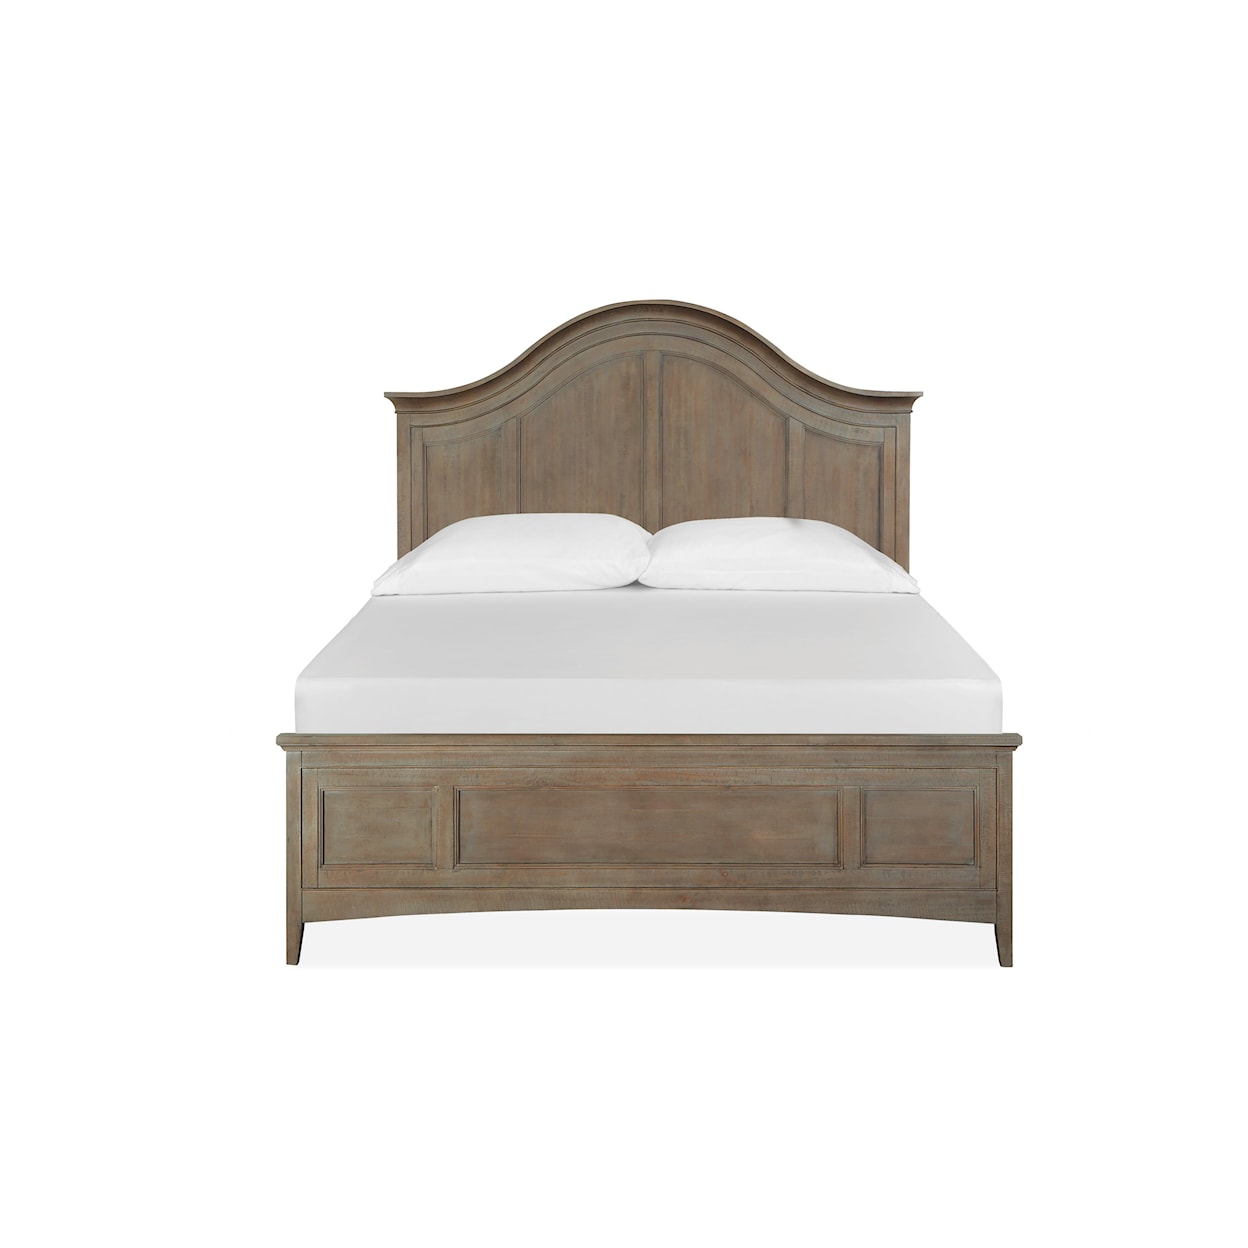 Magnussen Home Paxton Place Bedroom California King Arched Storage Bed 